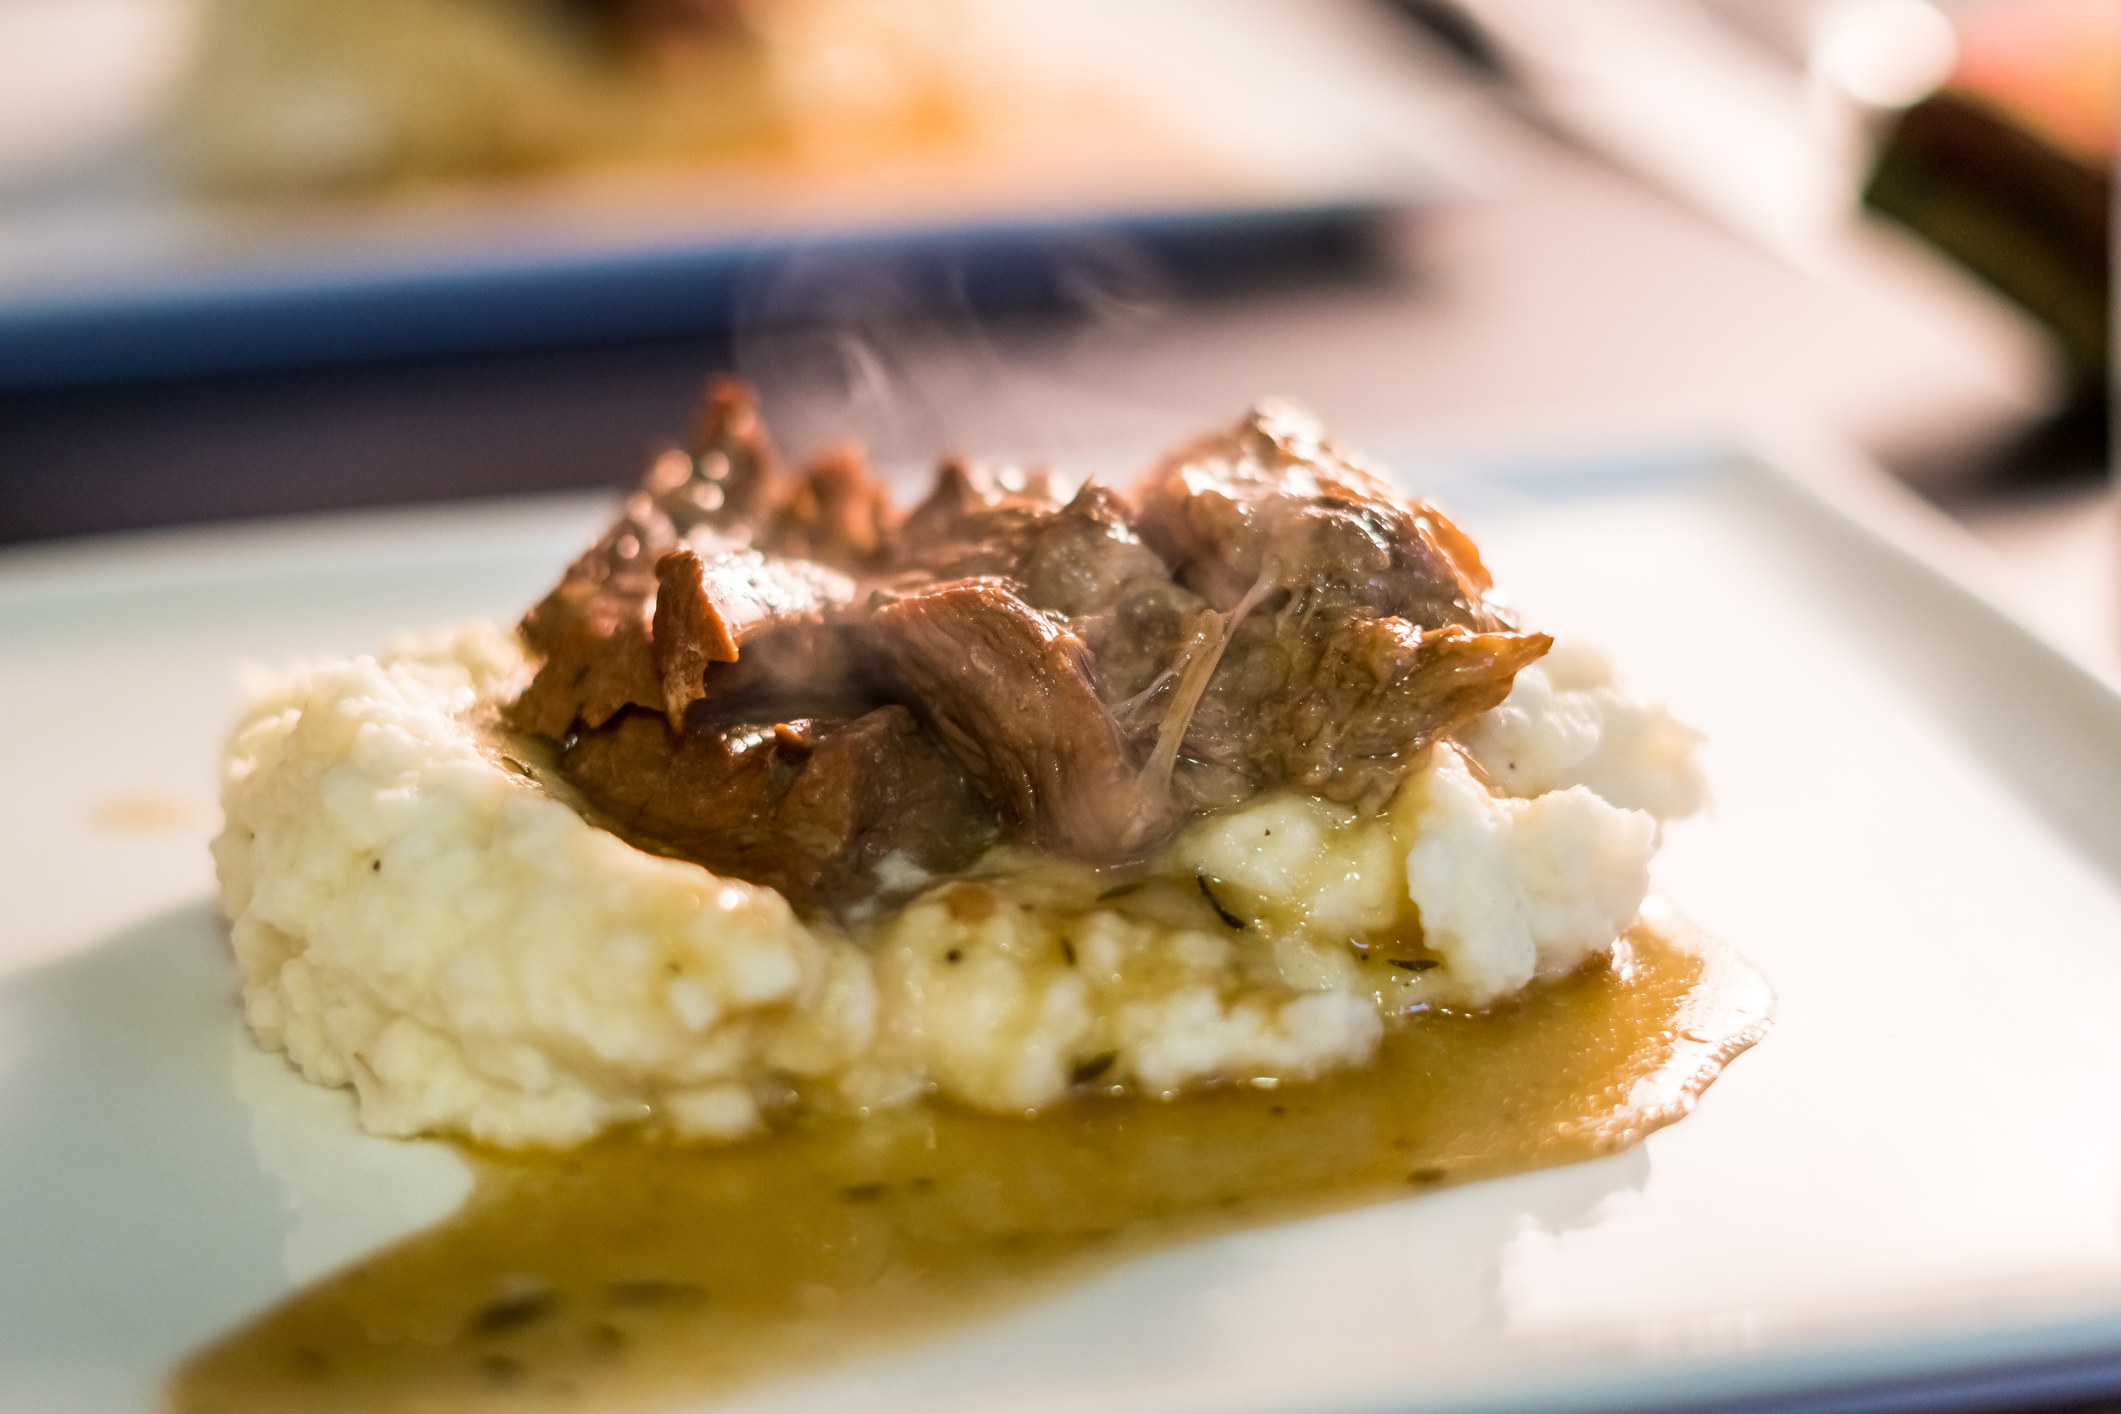 Pot roast with mashed potatoes on a plate